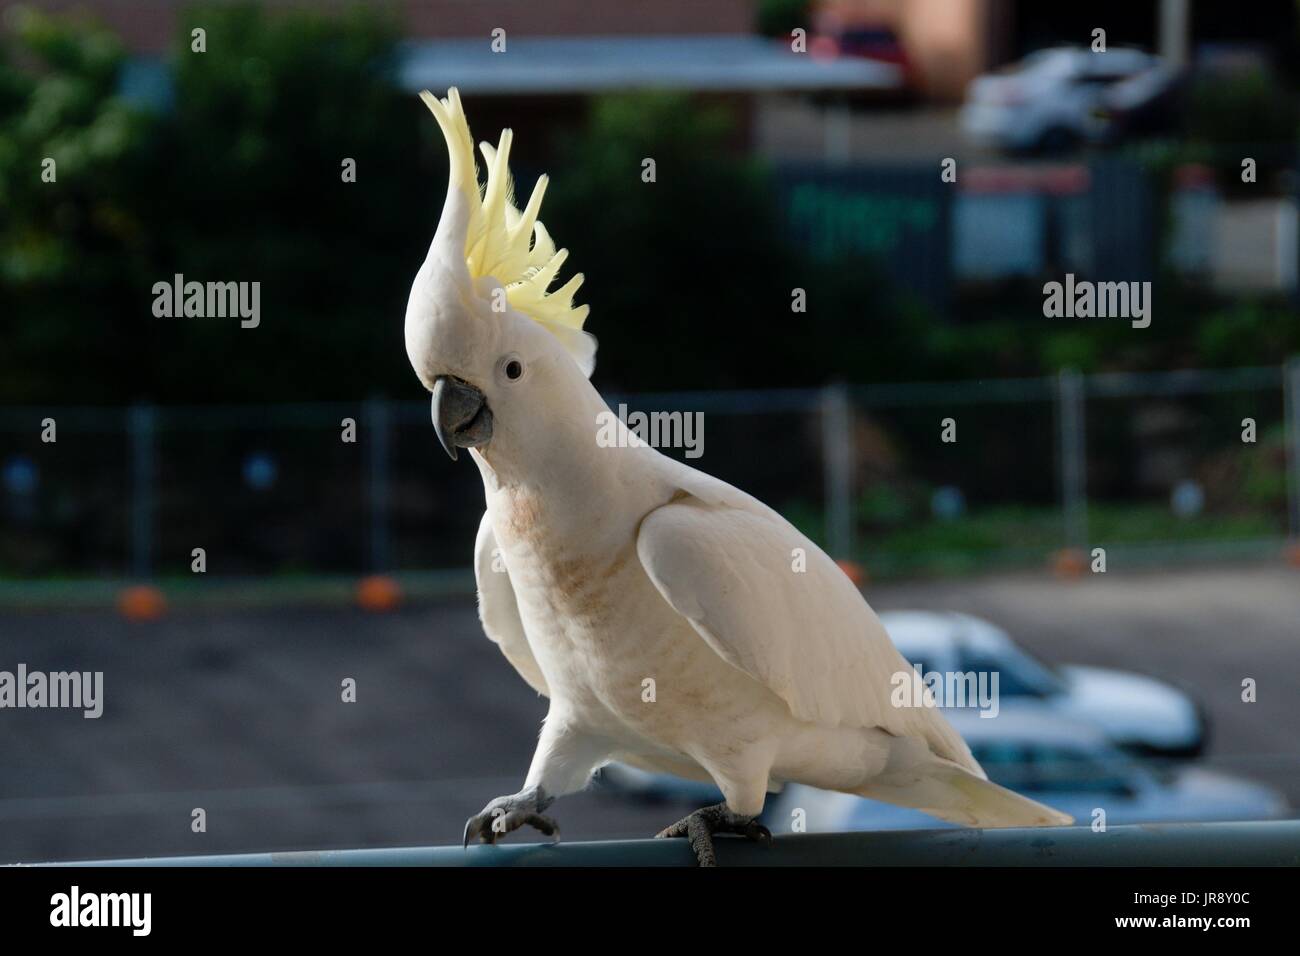 Australian Sulphur Crested Cockatoo close-up walking on a balcony rail with  an opened crest on display. Gosford, New South Wales, Australia Stock Photo  - Alamy